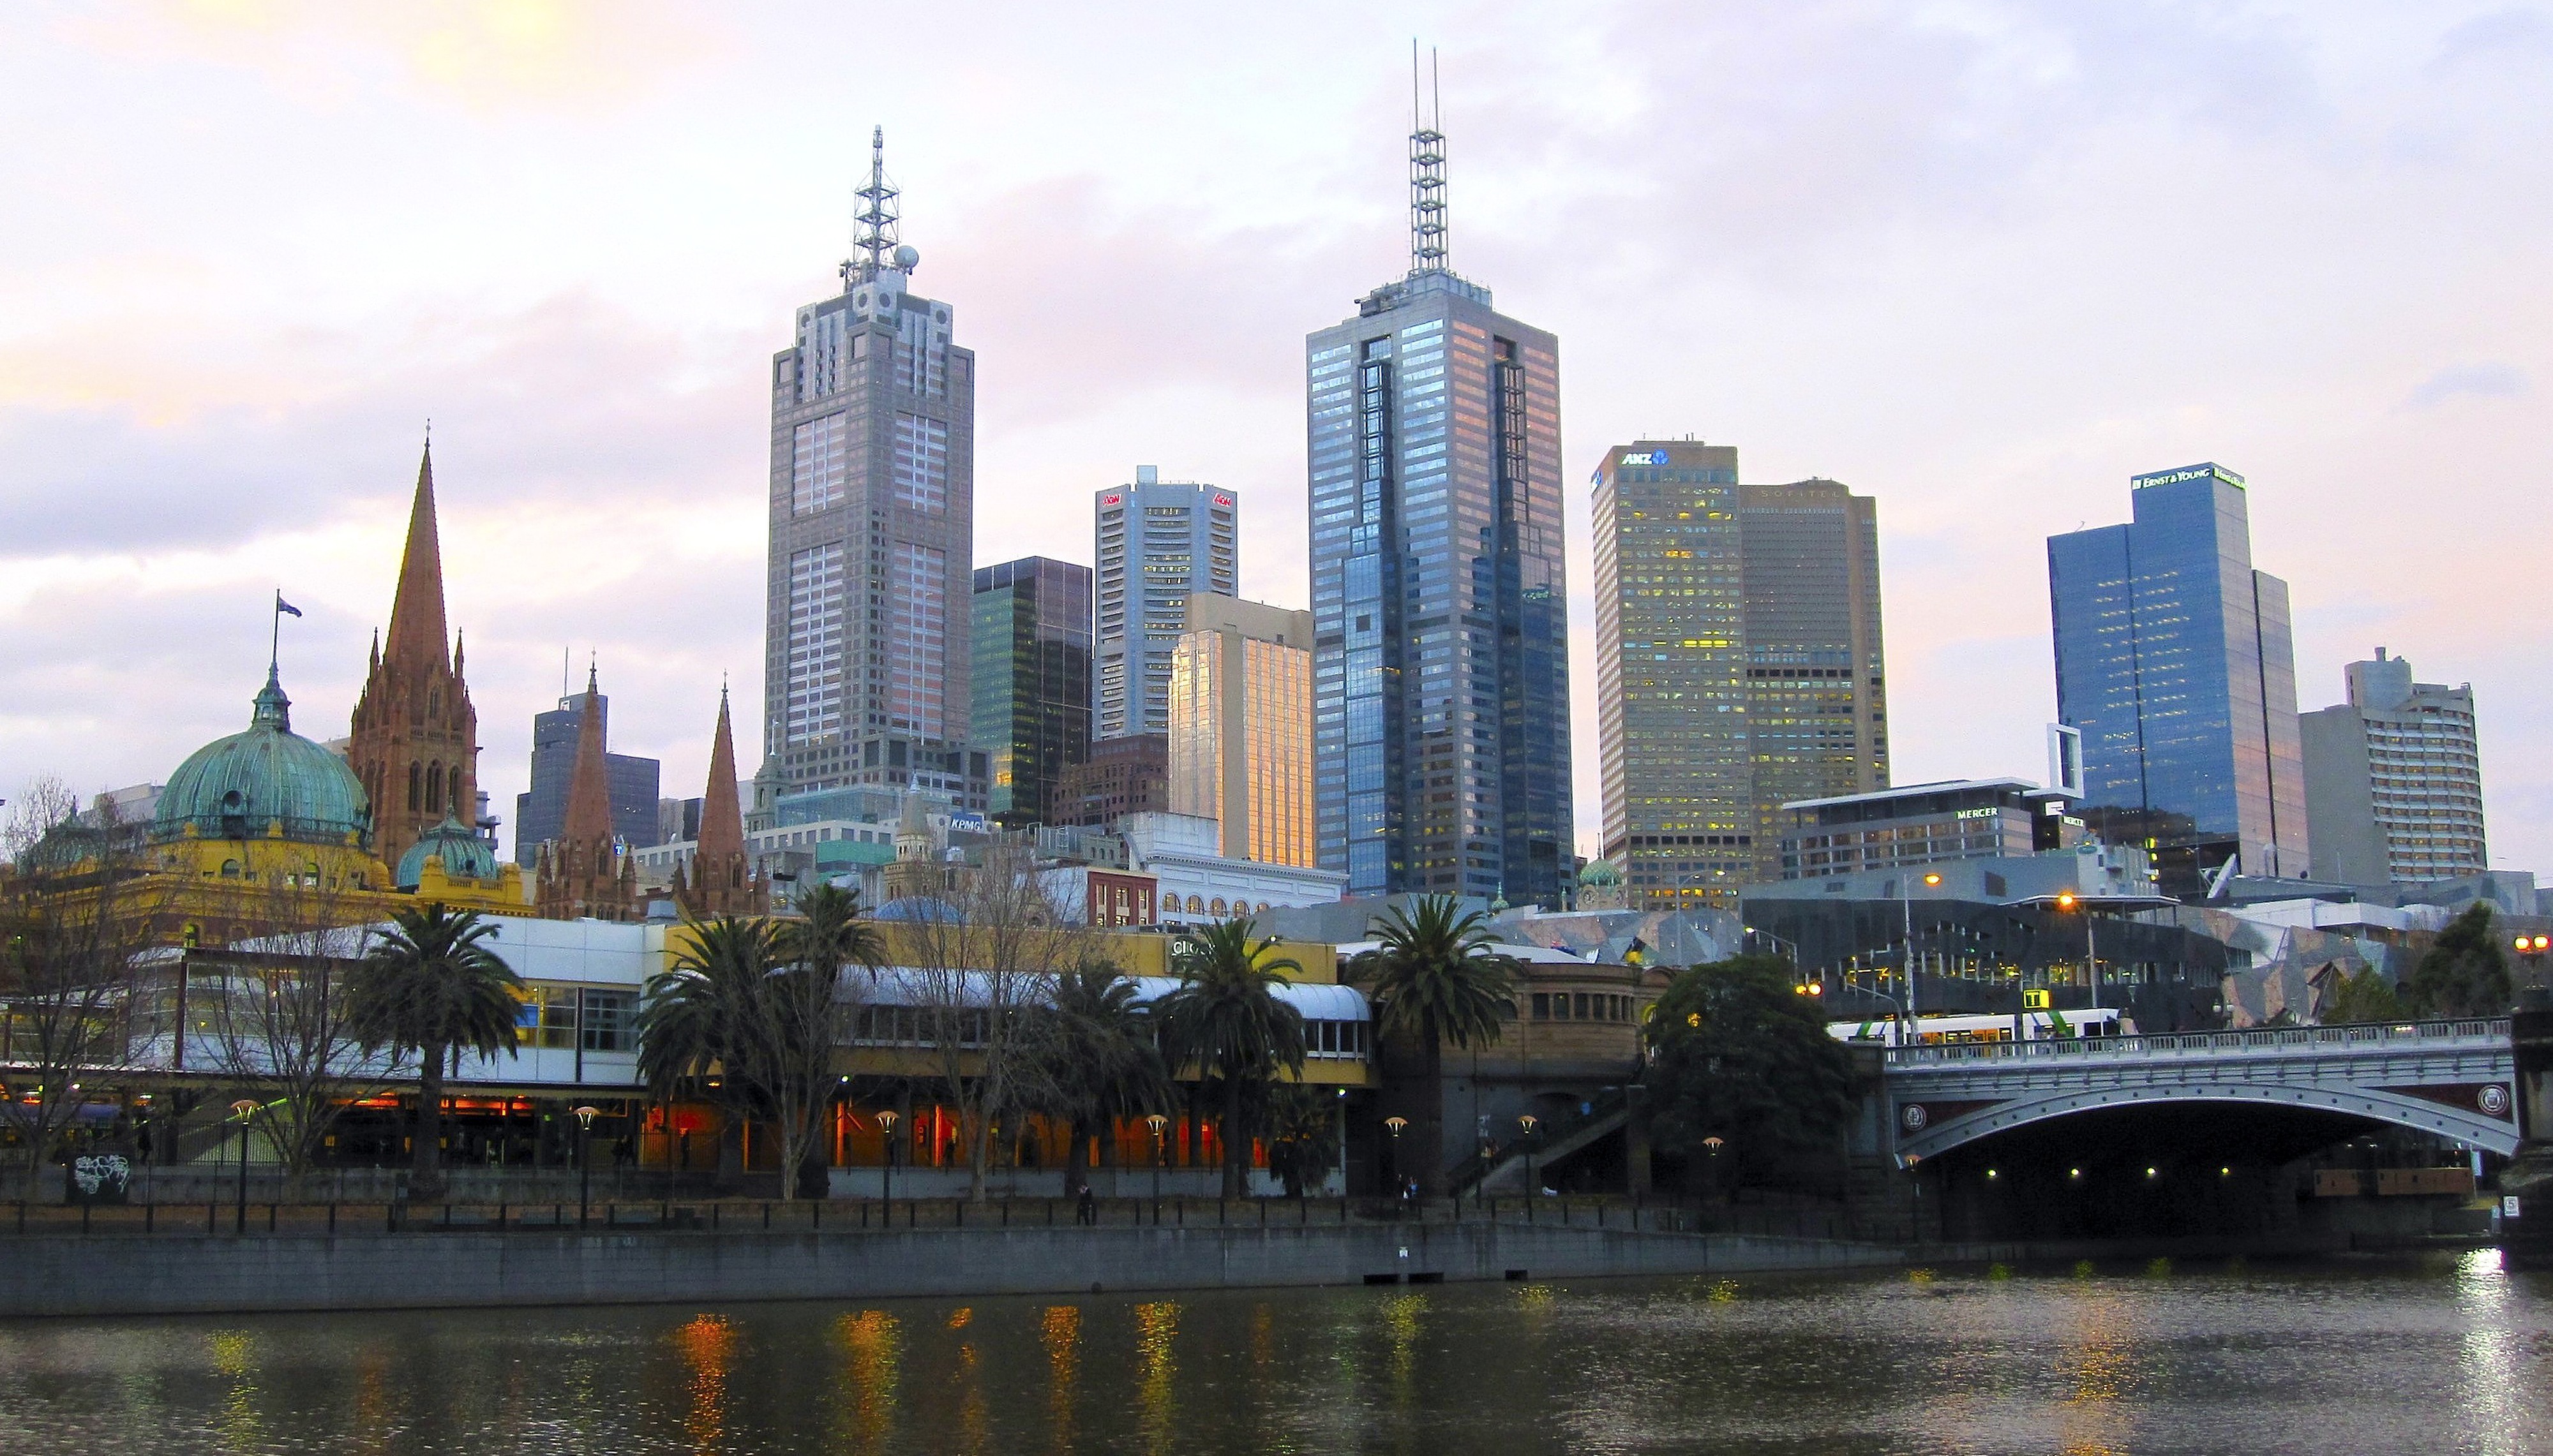 The state of Victory has approved a spate of new hotels to be built in Melbourne over the past two years. Photo: SCMP handout